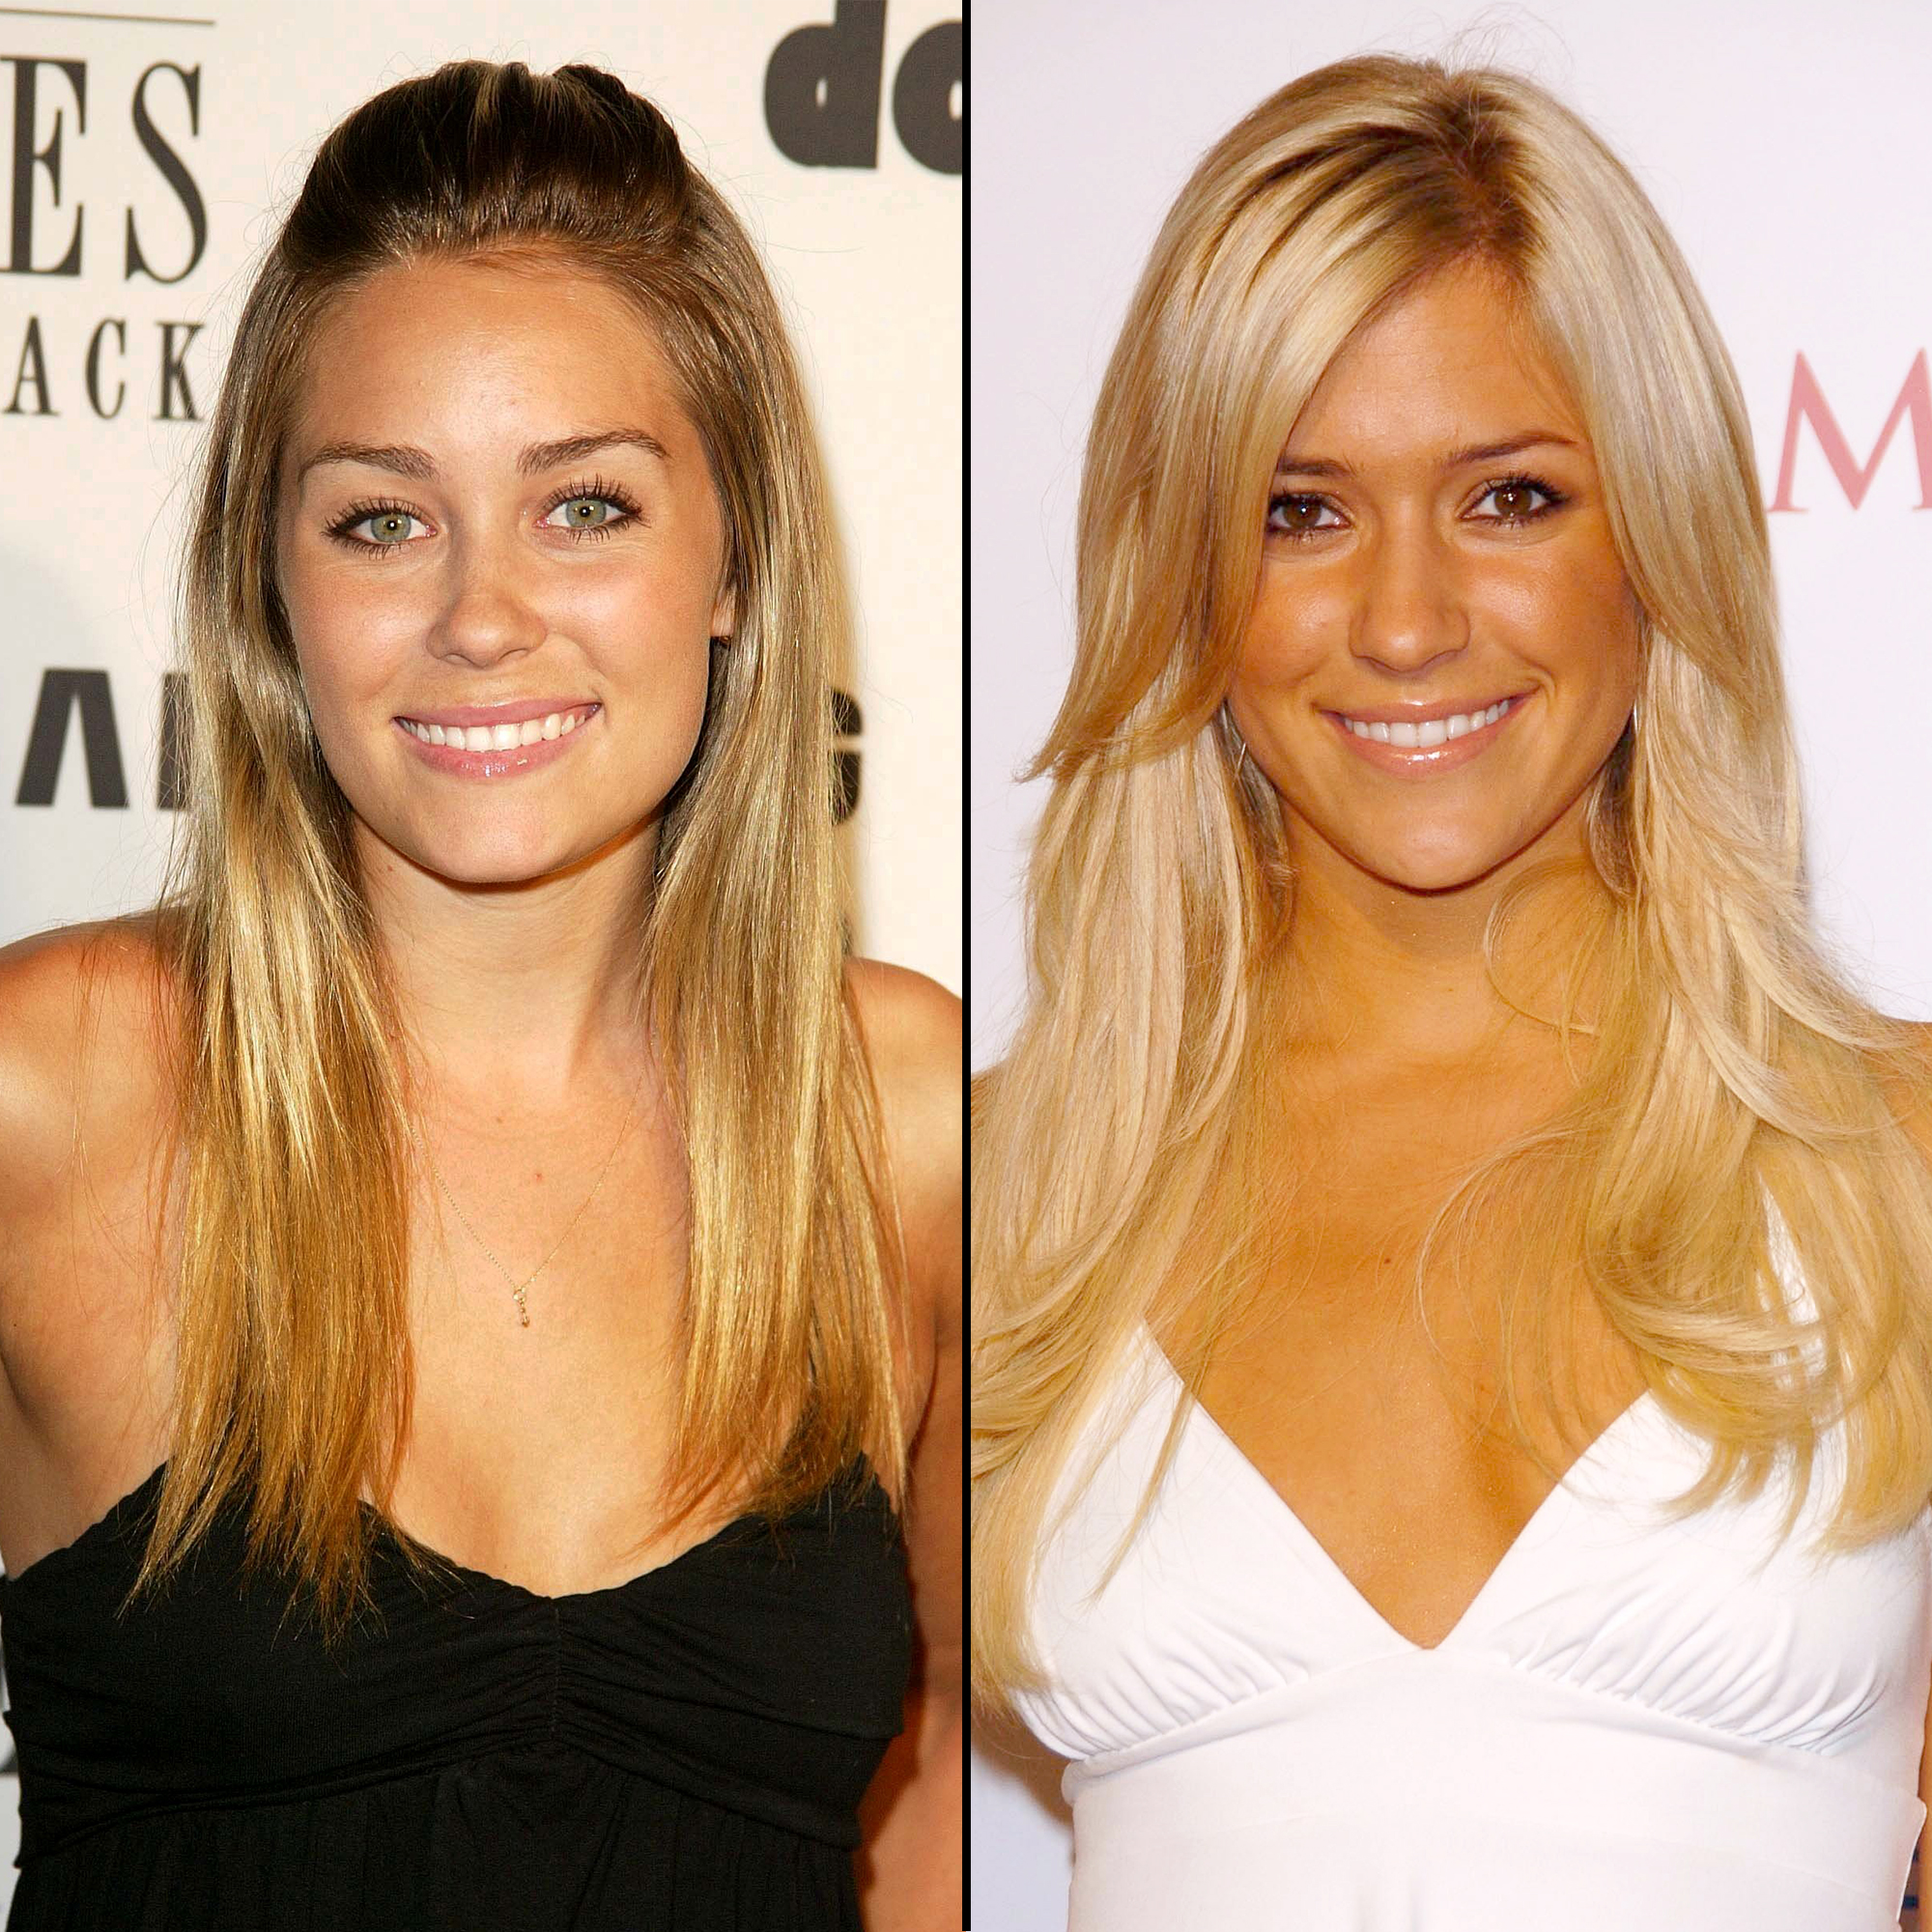 Best Episodes of The Hills: From Lauren Conrad to Kristin